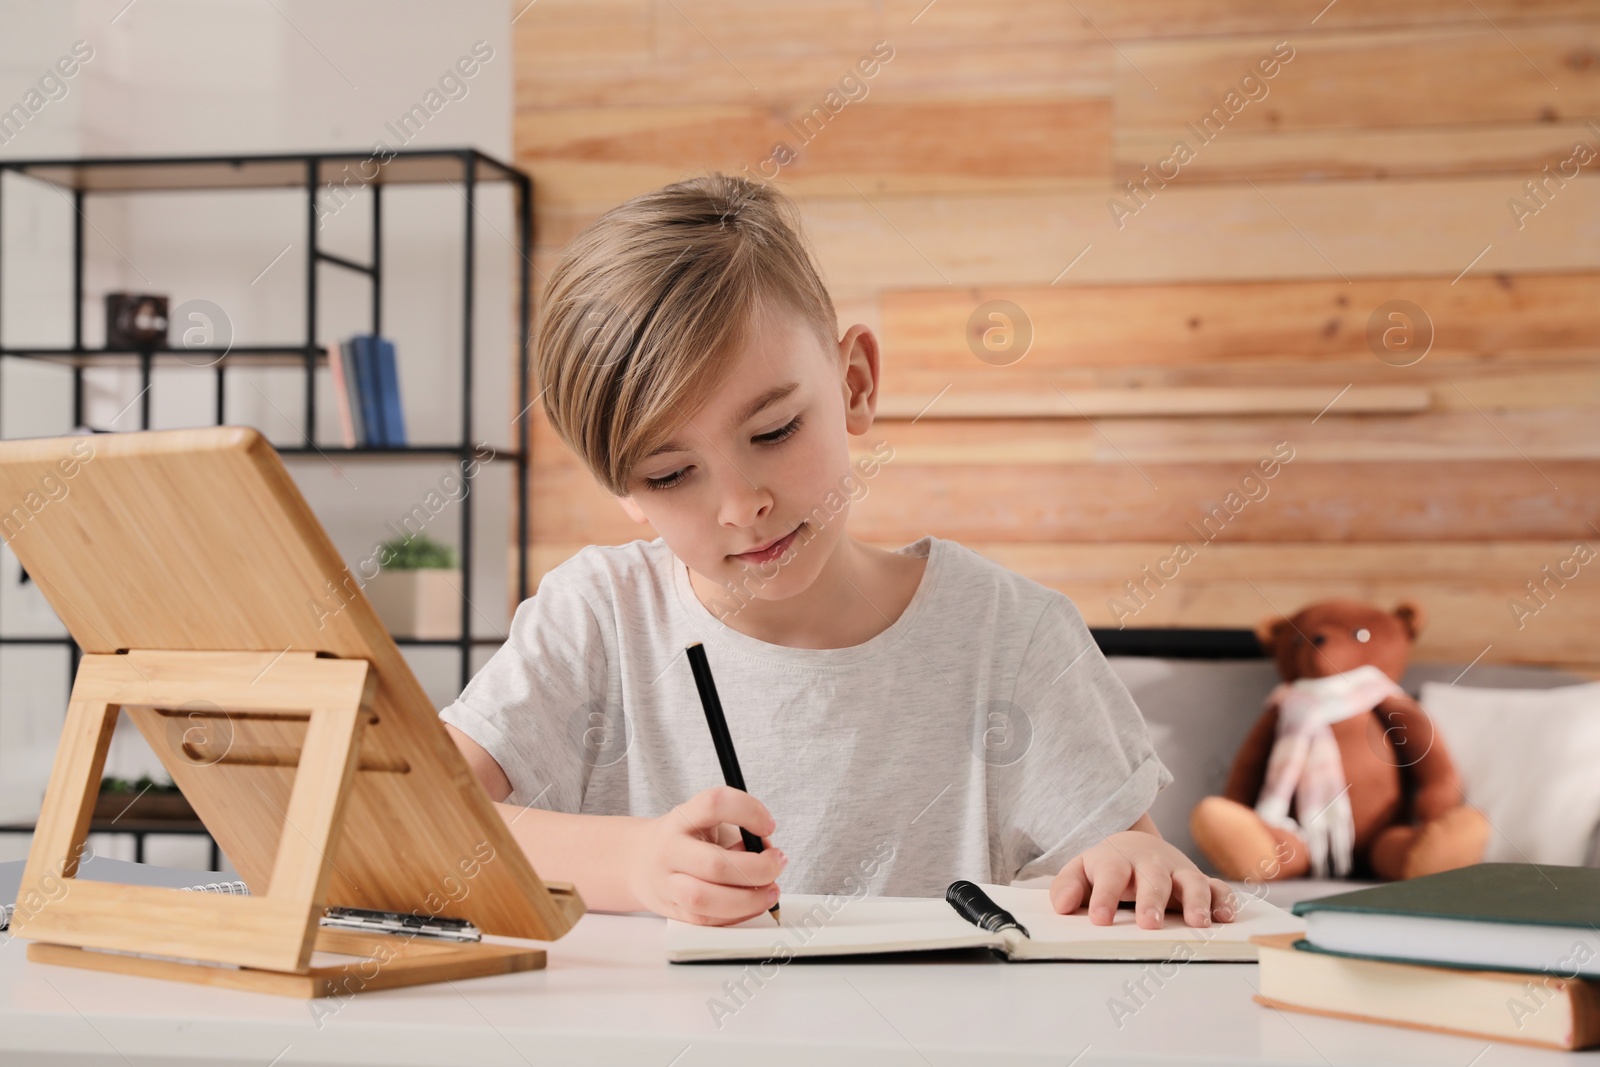 Photo of Cute boy doing homework at table indoors